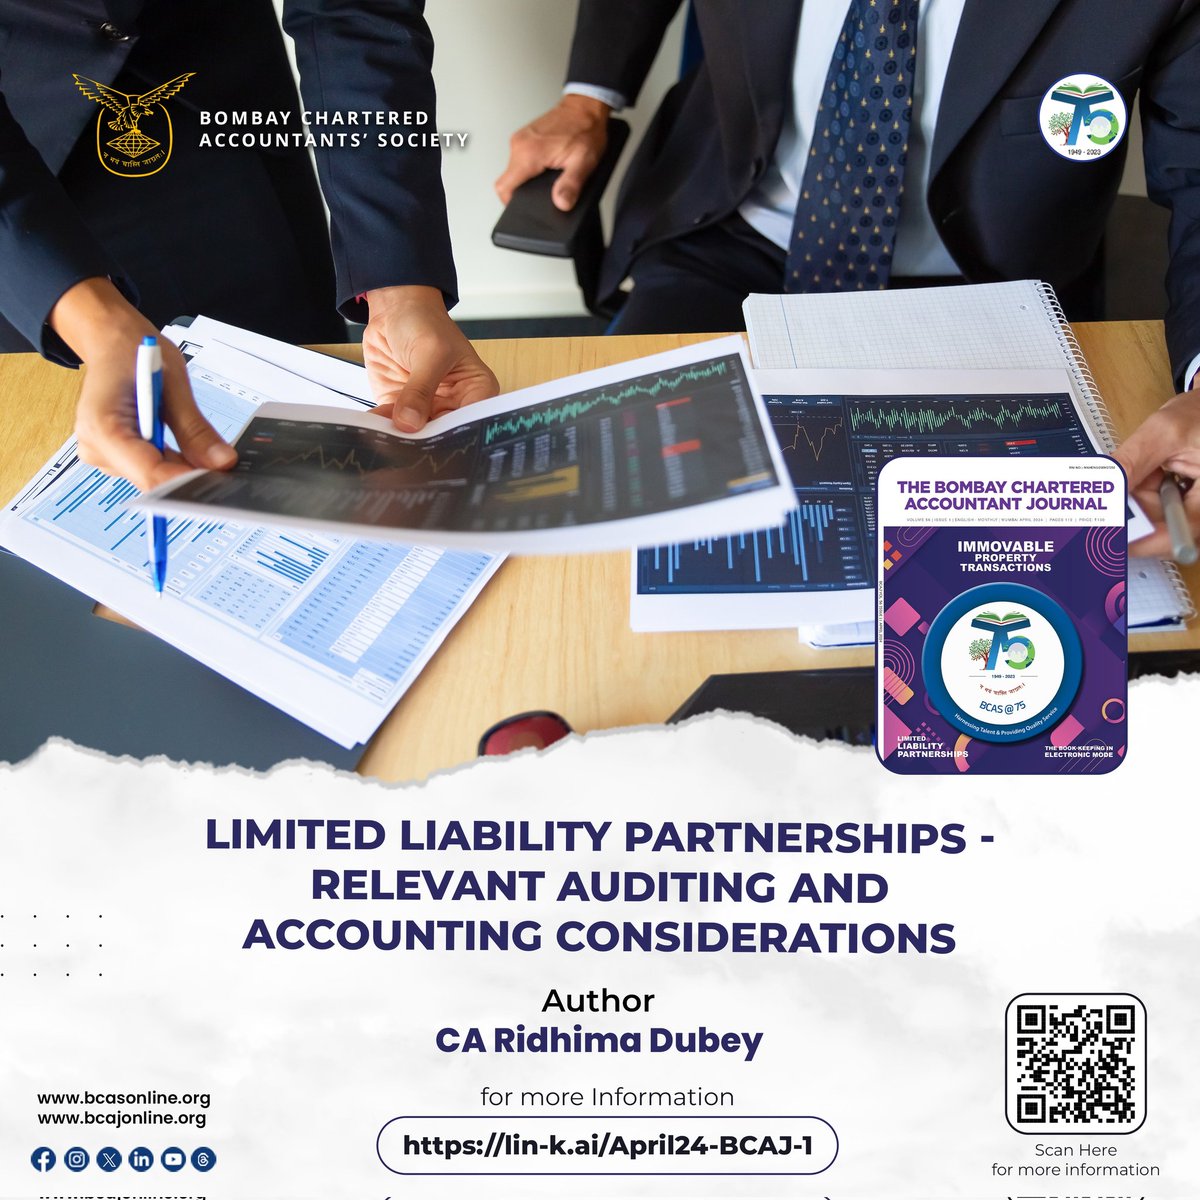 Understanding Audits and Accounting for Limited Liability Partnerships (LLPs)

(1/4)